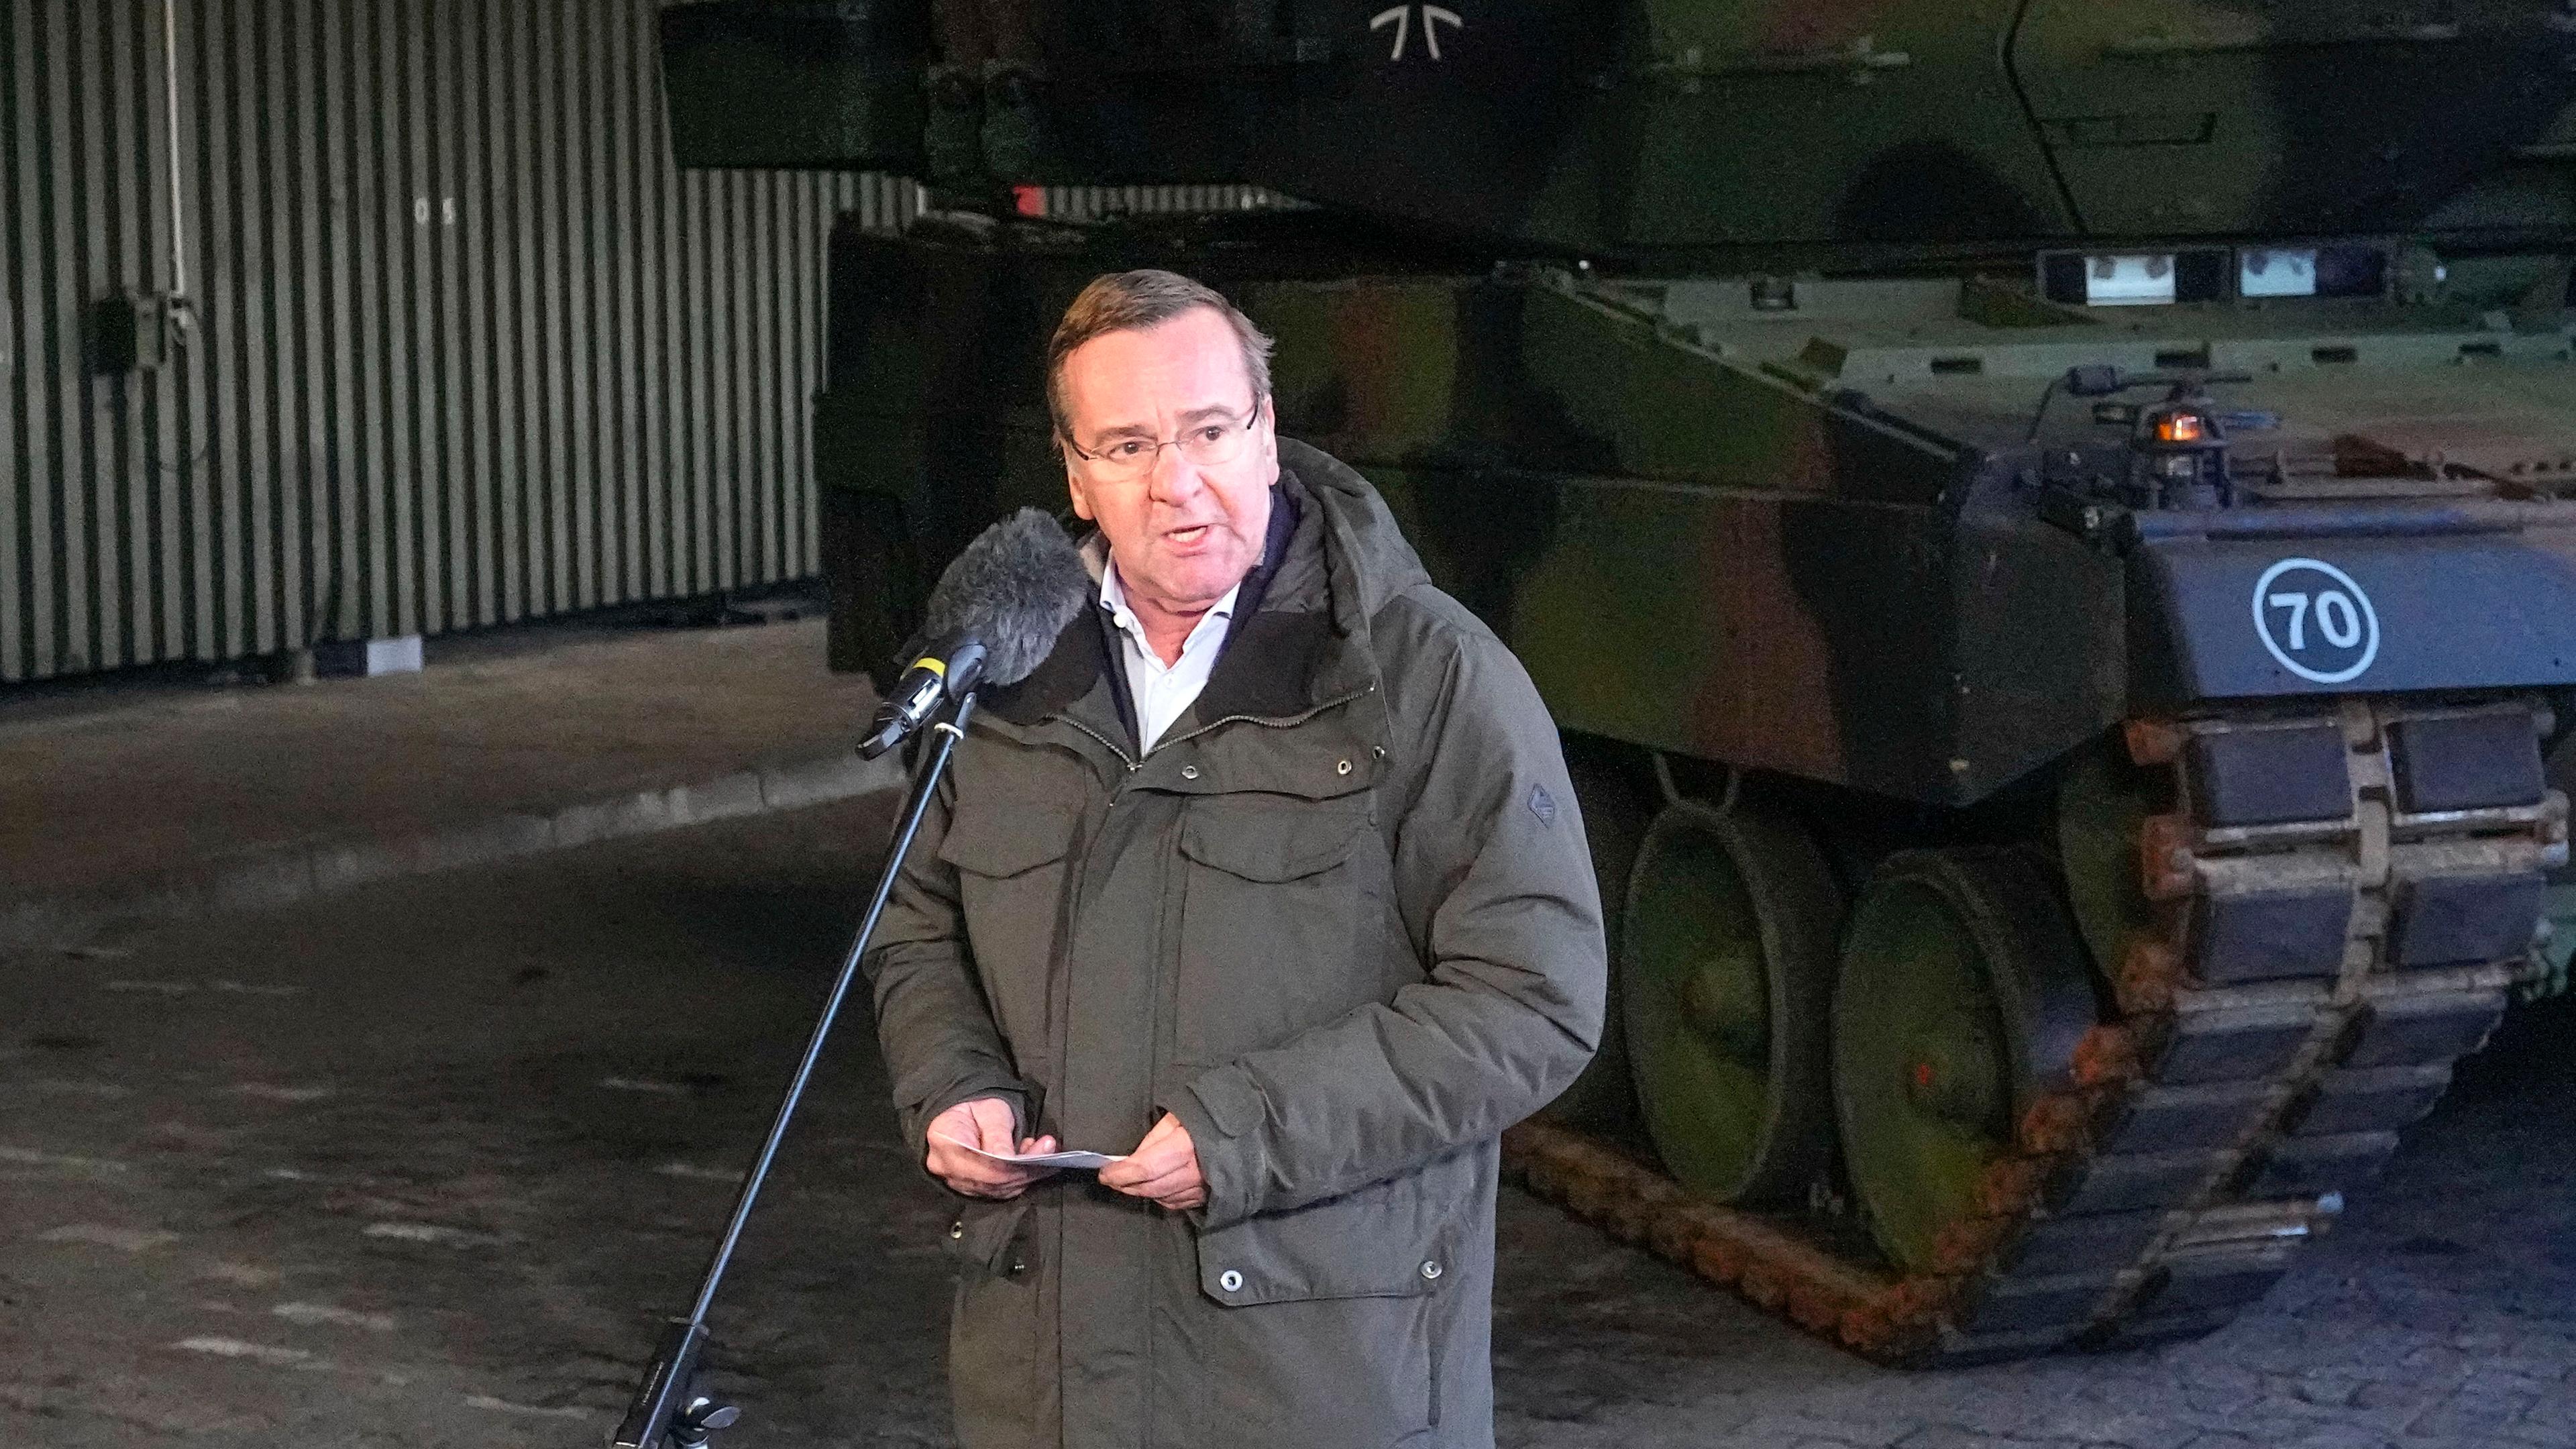 Defense Minister Pistorius speaks in front of a Leopard 1 tank.